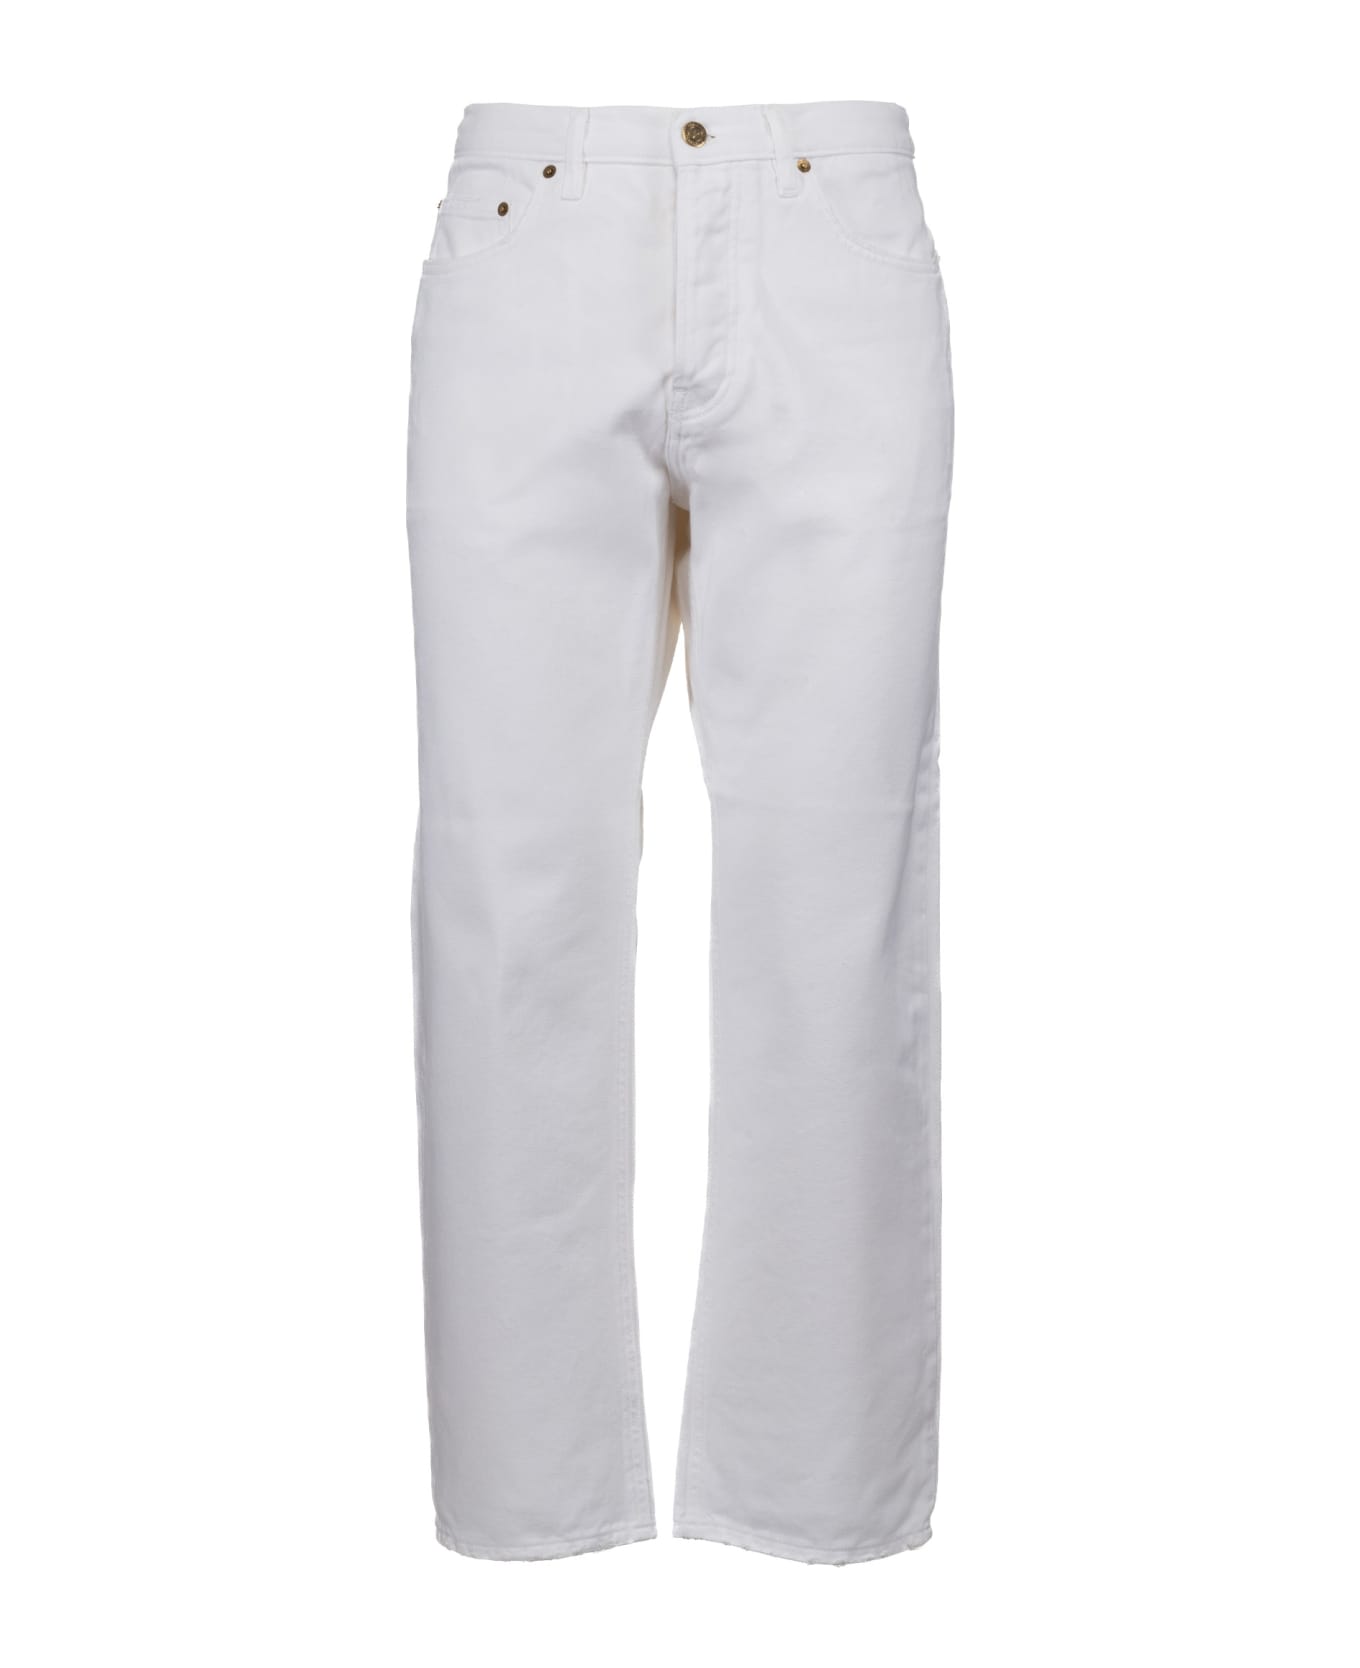 Golden Goose Cory Jeans - Bianco ボトムス